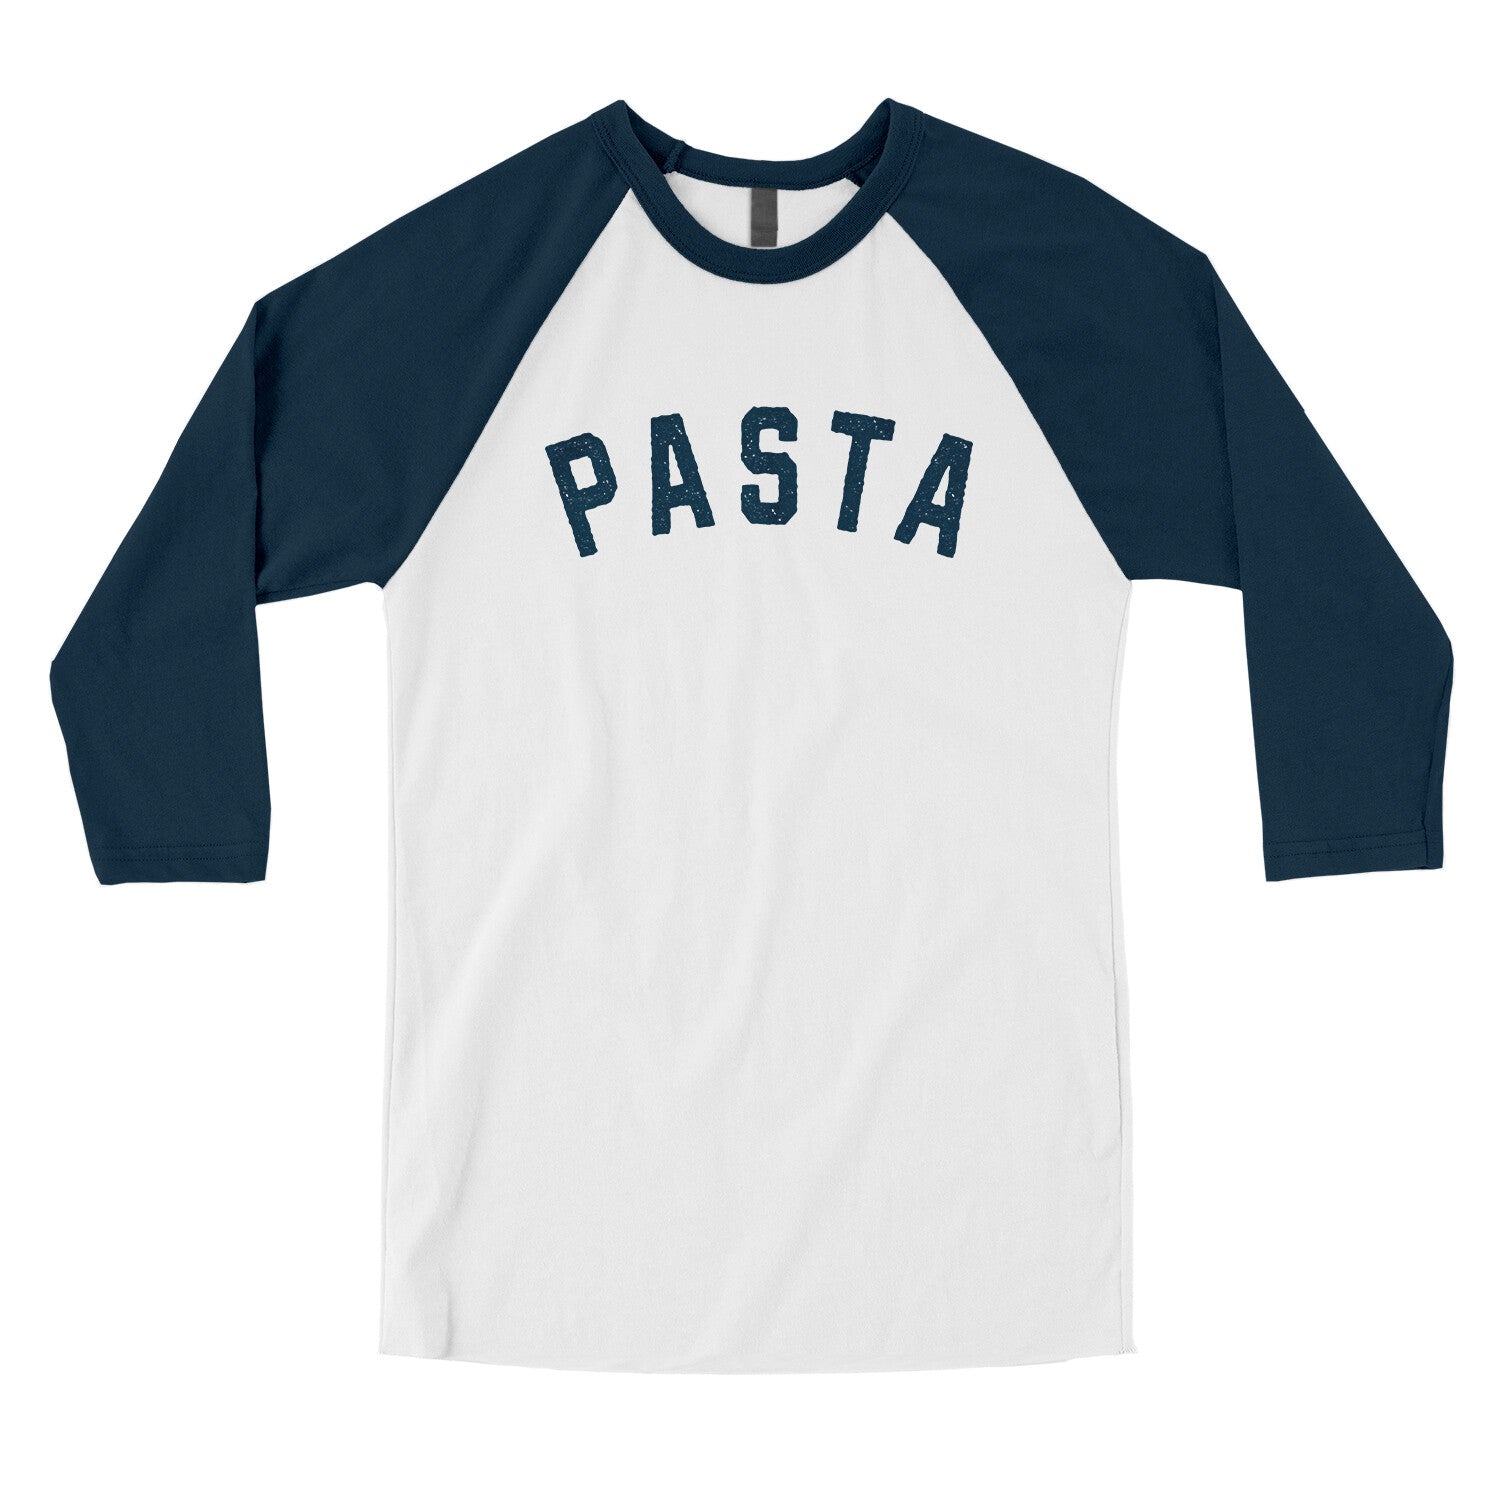 Pasta in White with Navy Color